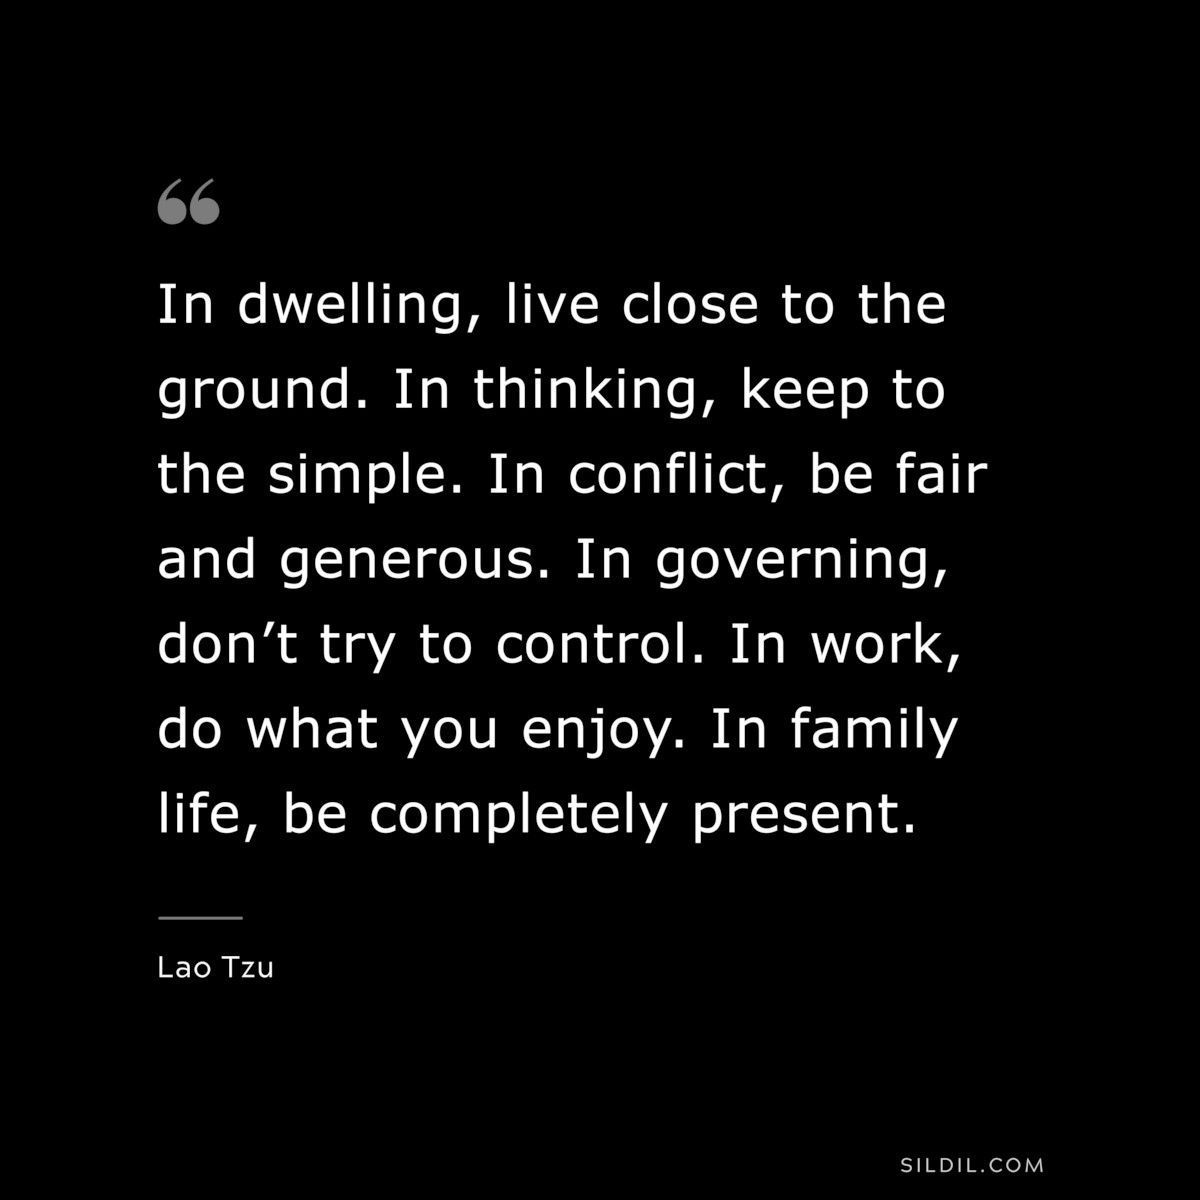 In dwelling, live close to the ground. In thinking, keep to the simple. In conflict, be fair and generous. In governing, don’t try to control. In work, do what you enjoy. In family life, be completely present. ― Lao Tzu